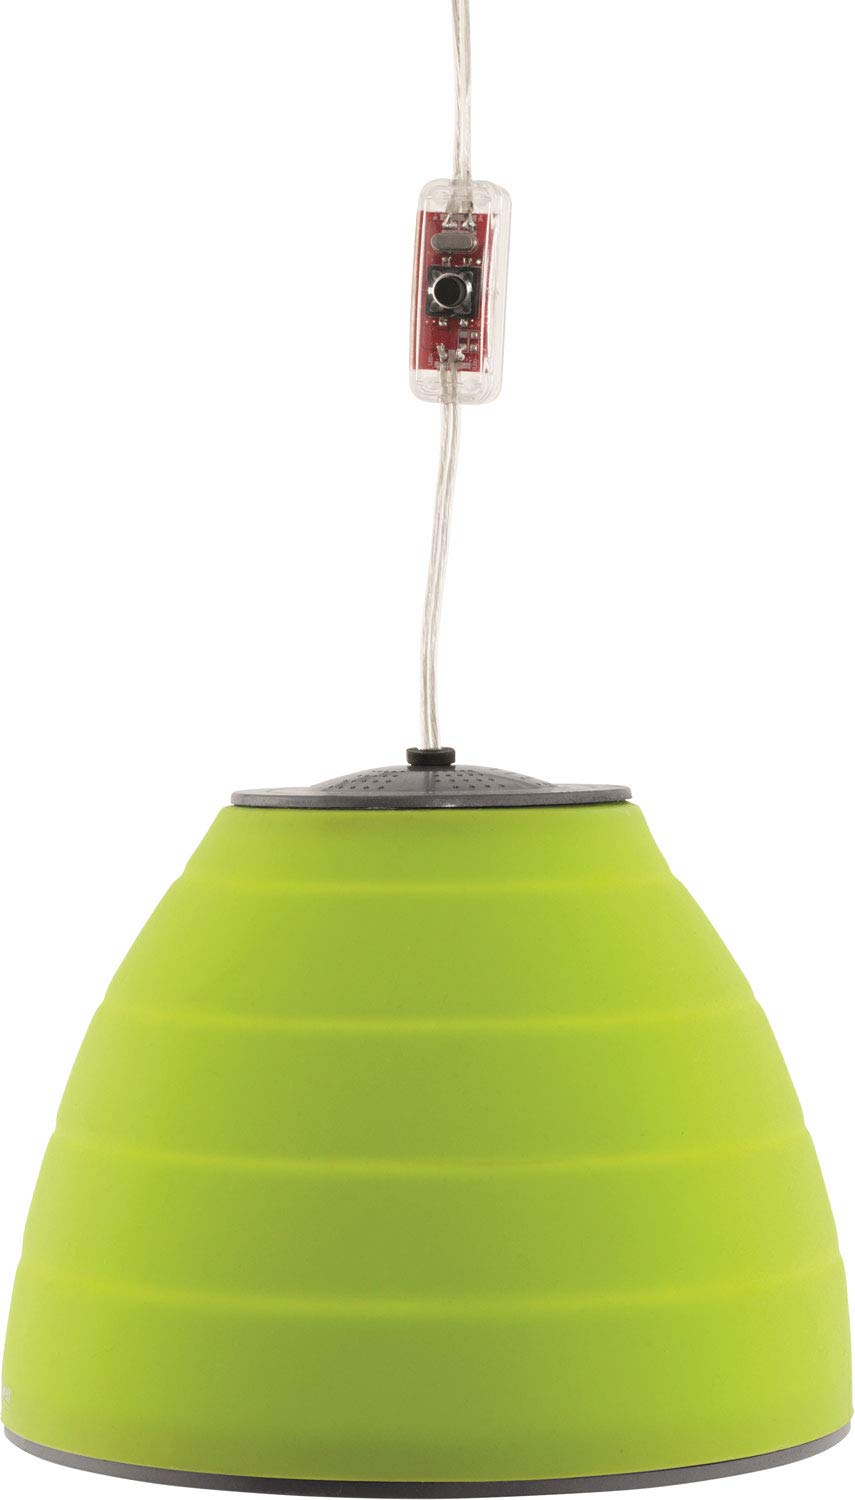 Outwell 650867 Zeltlampe Orion Lux lime von Outwell